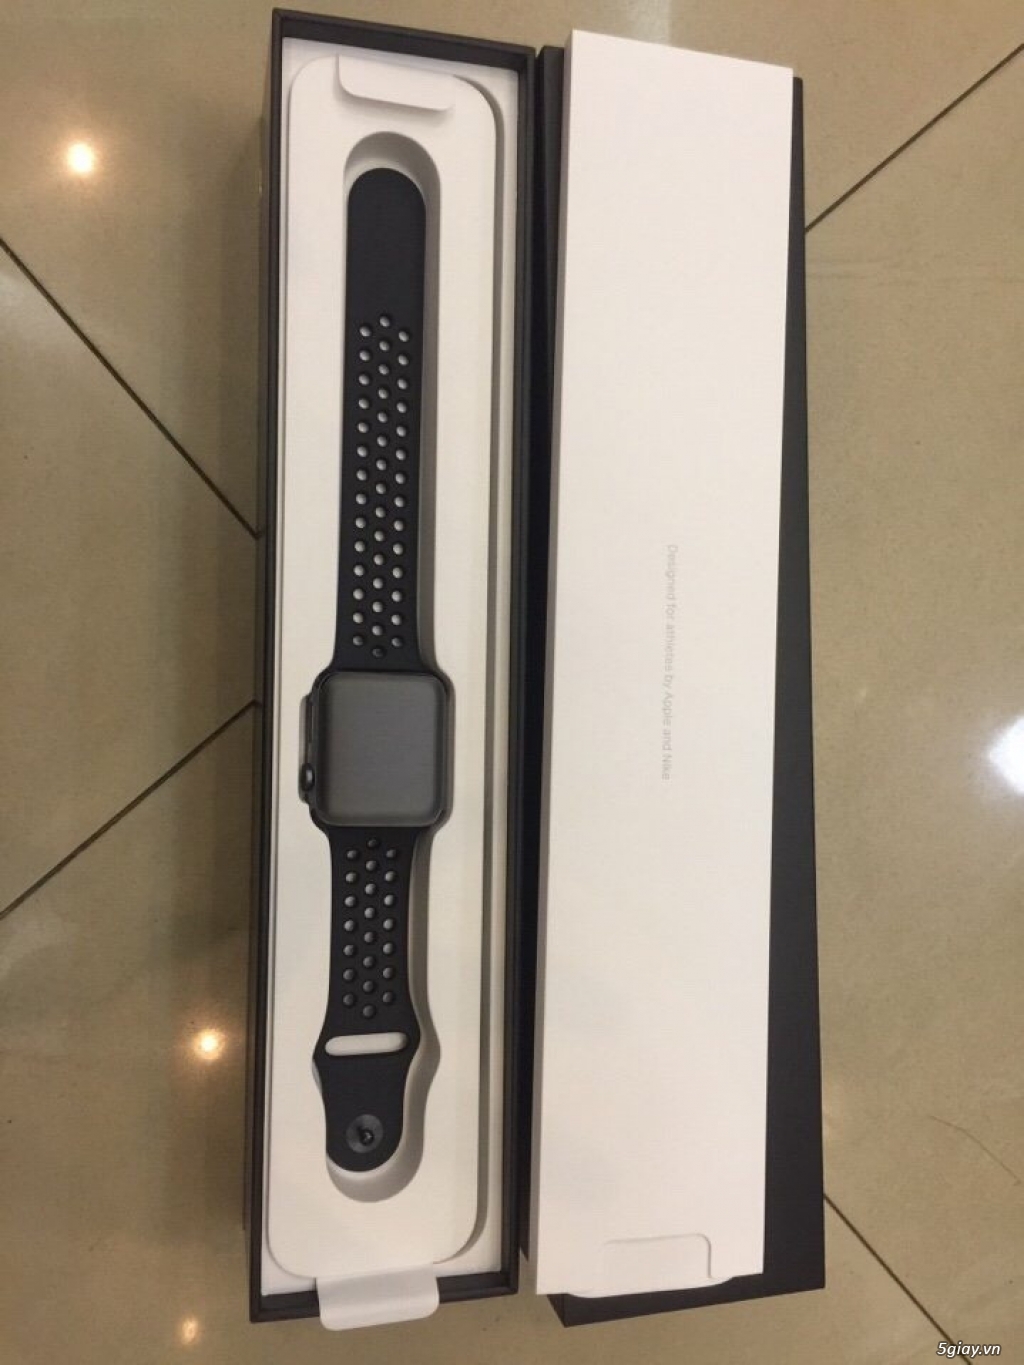 AppleWatch Series 2 42mm Space Gray Aluminum Nike Sport Band - 5